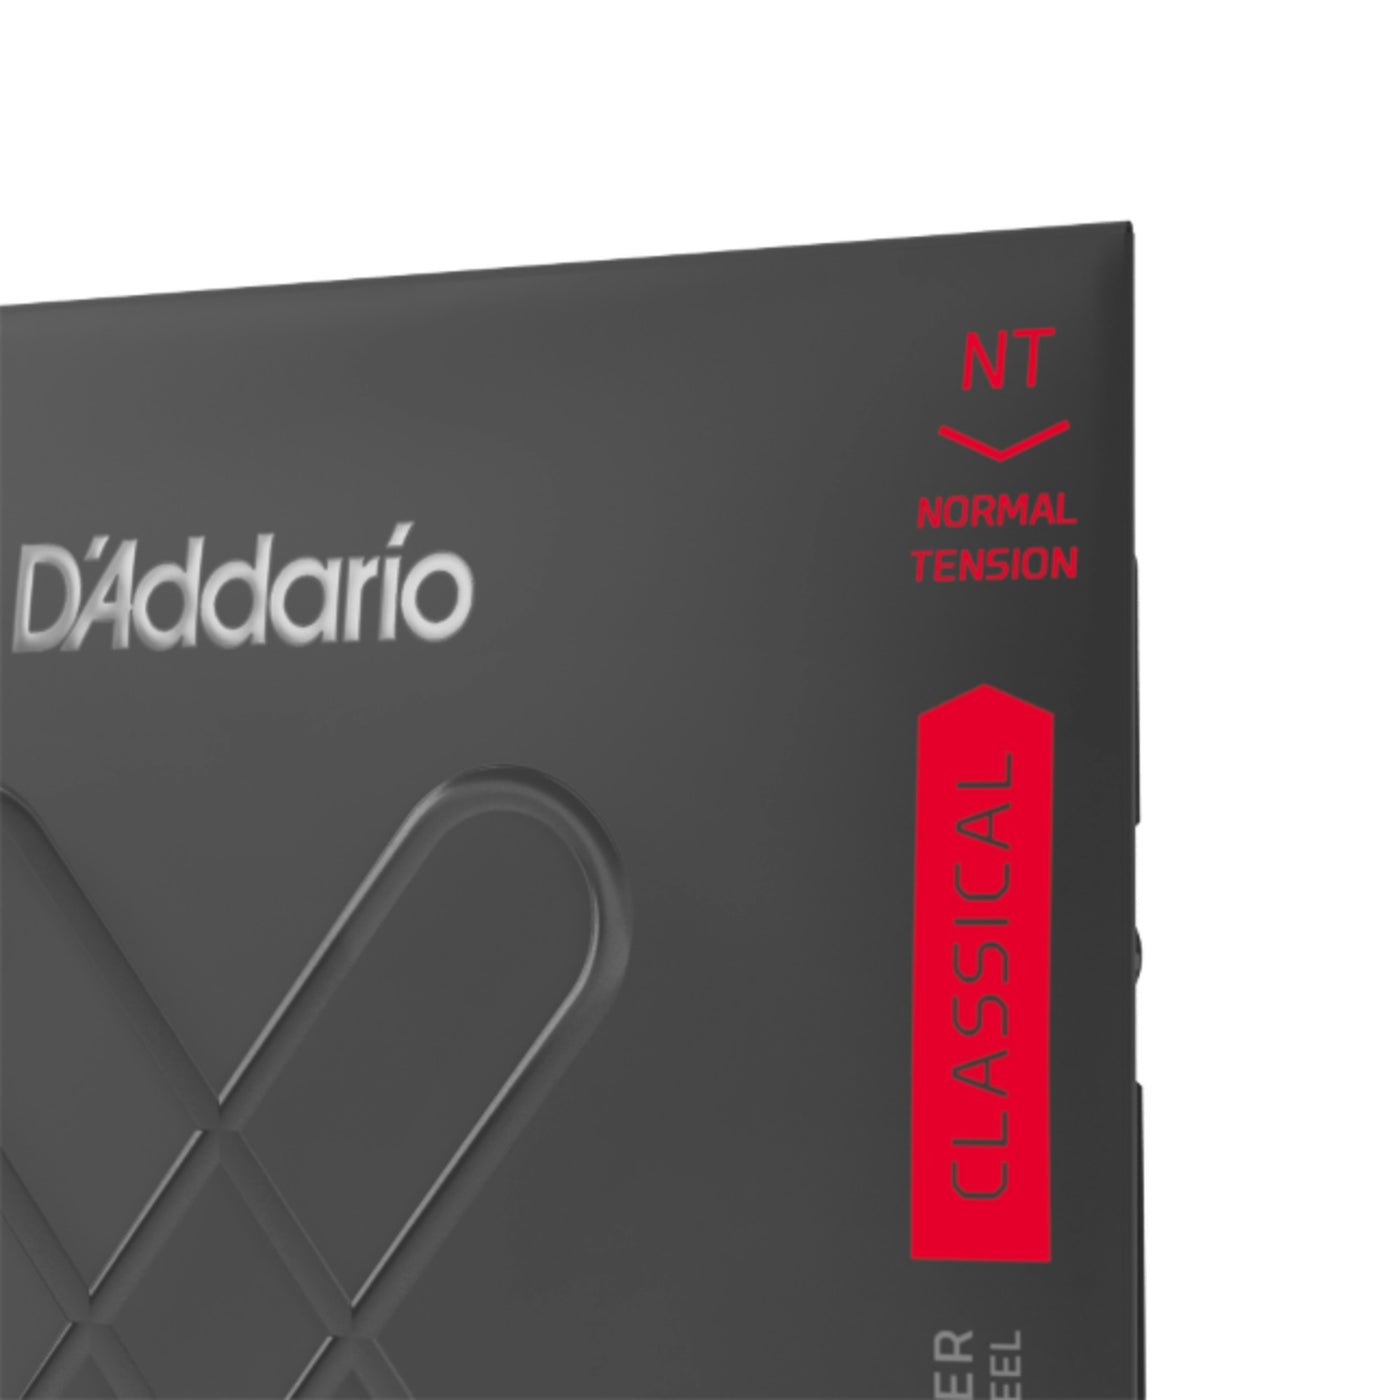 D'Addario XT Classical Silver Plated Copper Strings, Normal Tension (XTC45)